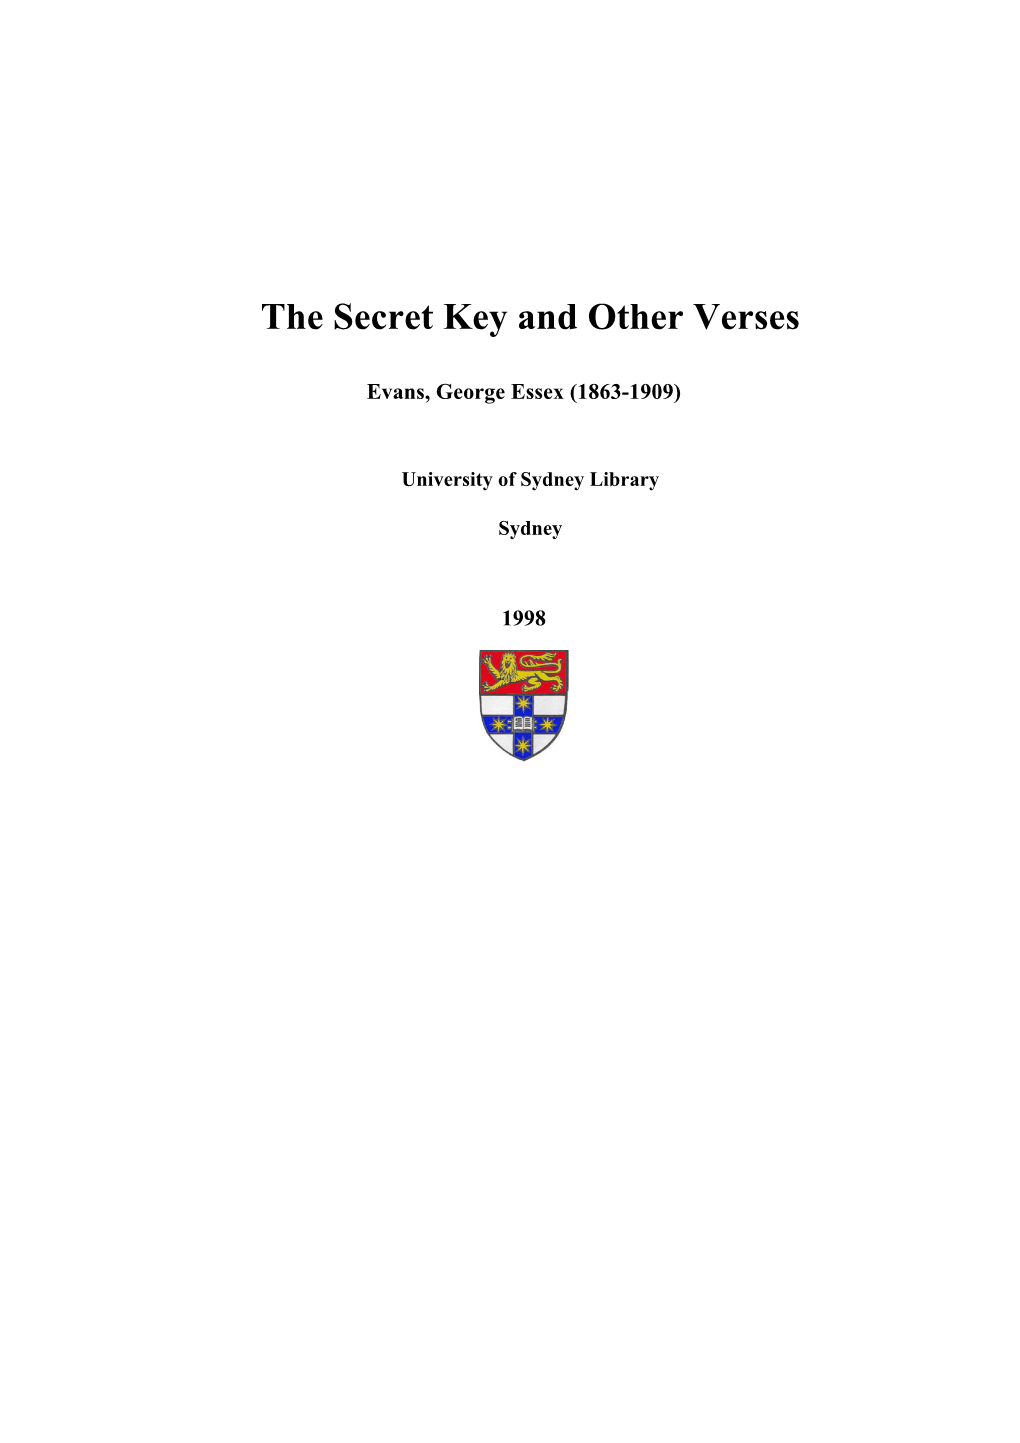 The Secret Key and Other Verses